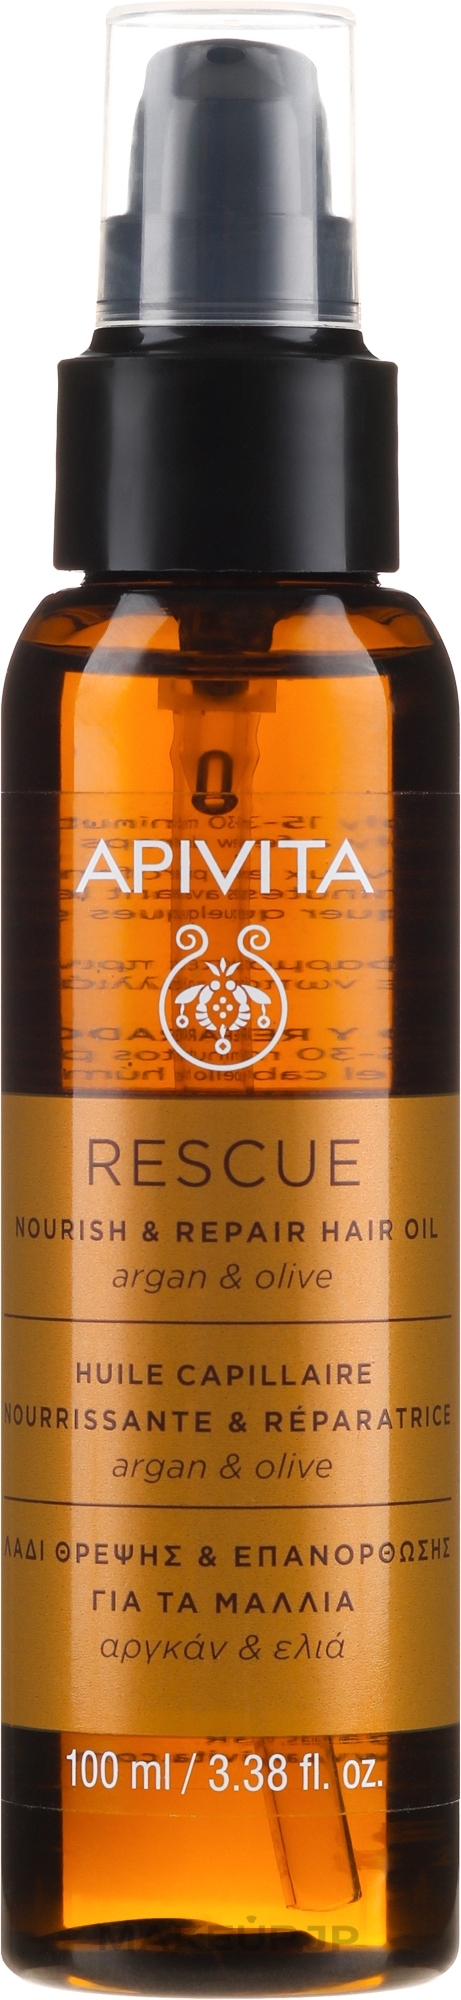 Hair Repair and Nourish Oil with Argan Oil and Olive - Apivita Rescue Hair Oil With Argan Oil & Olive — photo 100 ml